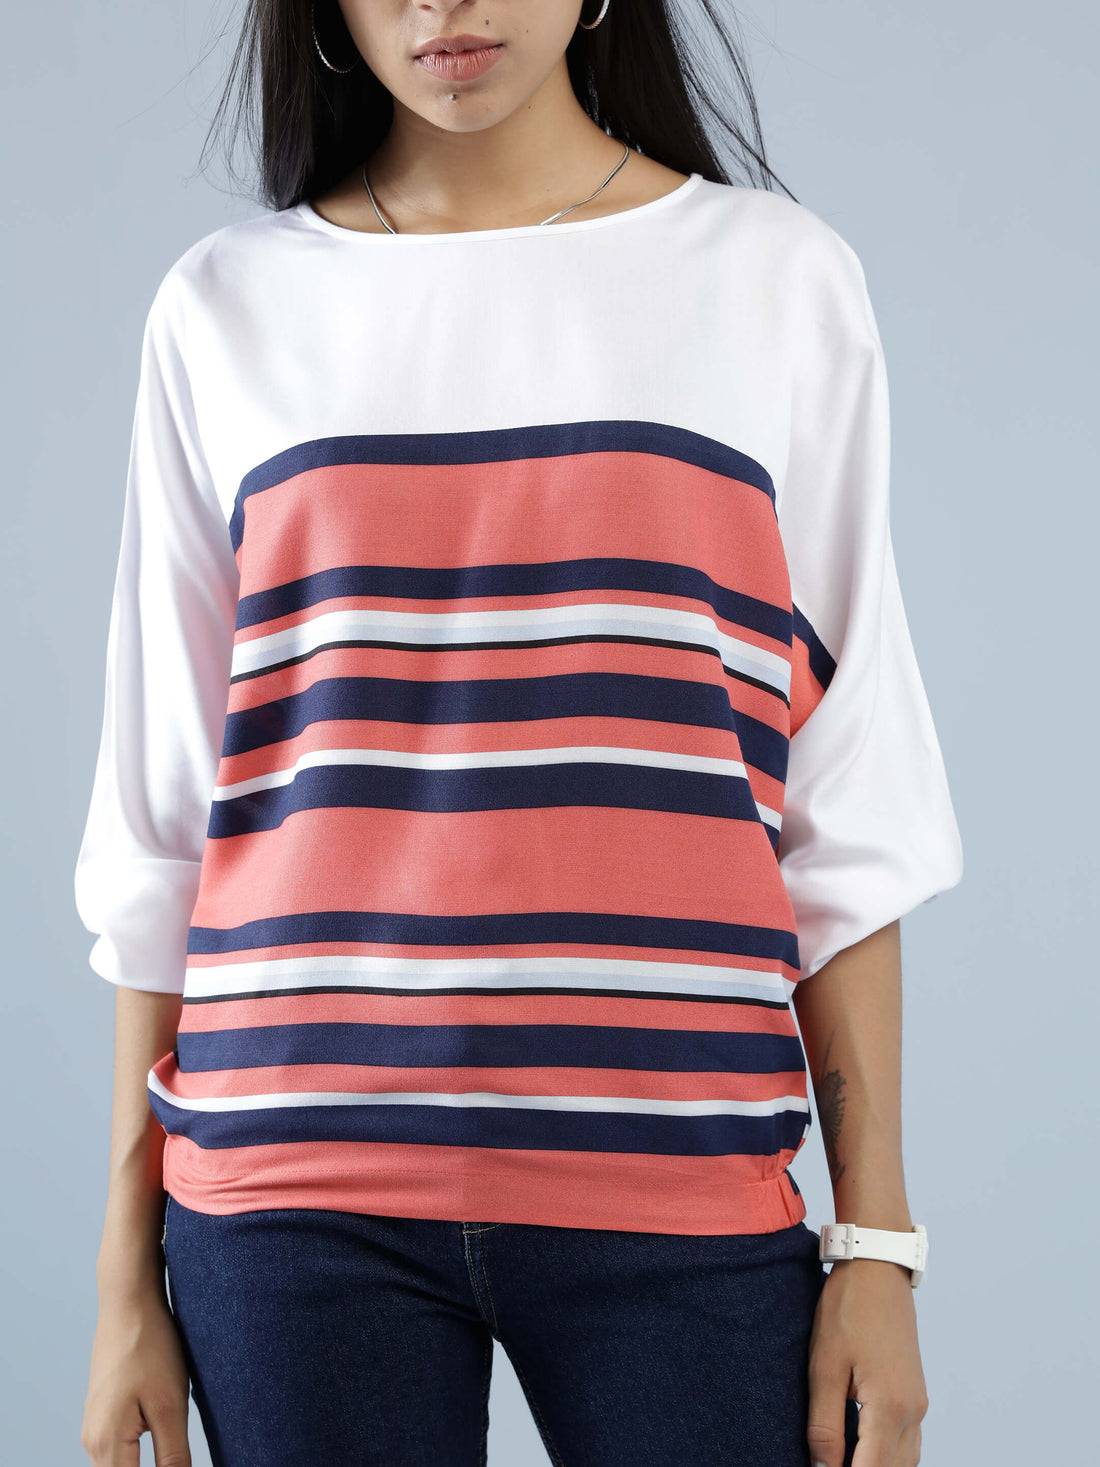 Pink Striped Top